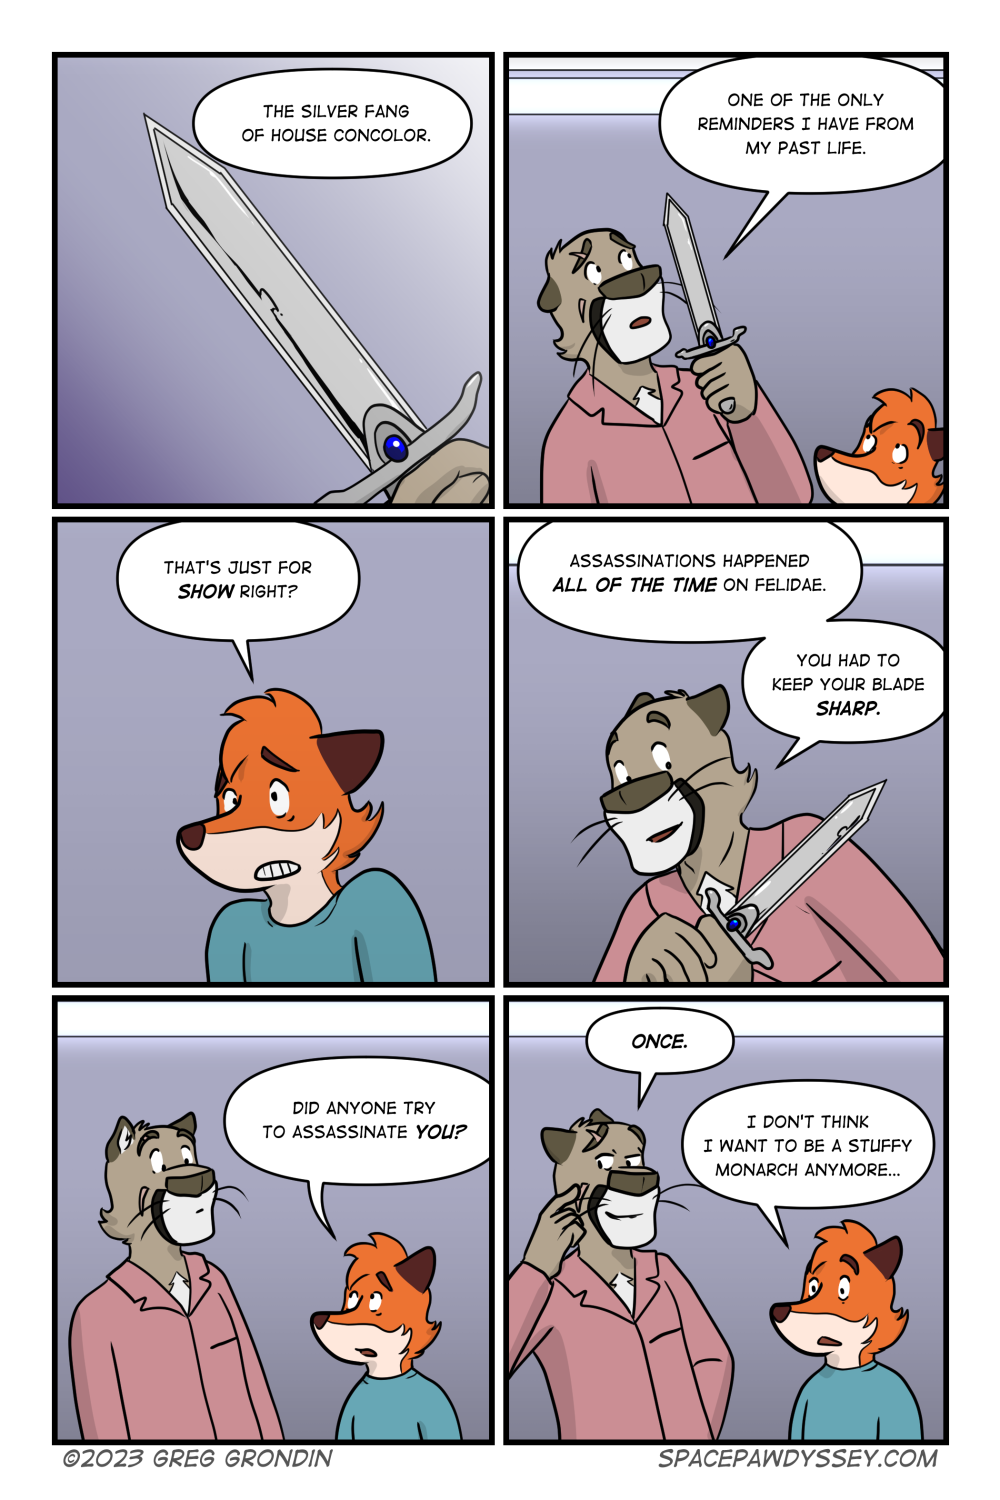 Space Pawdyssey #653